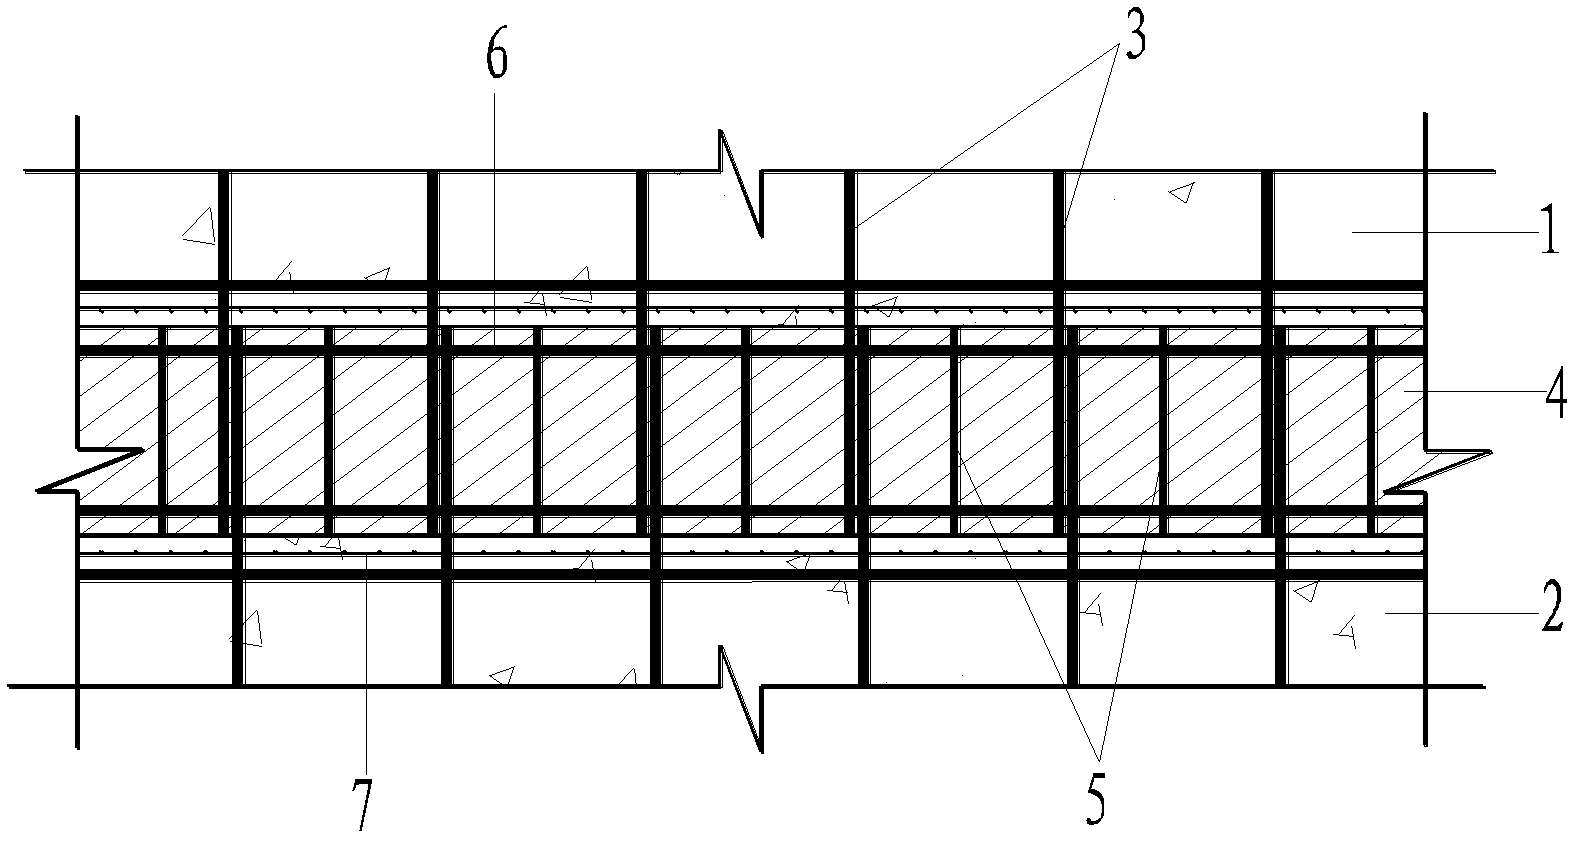 Method for connecting wallboard components of precast concrete shear wall structure